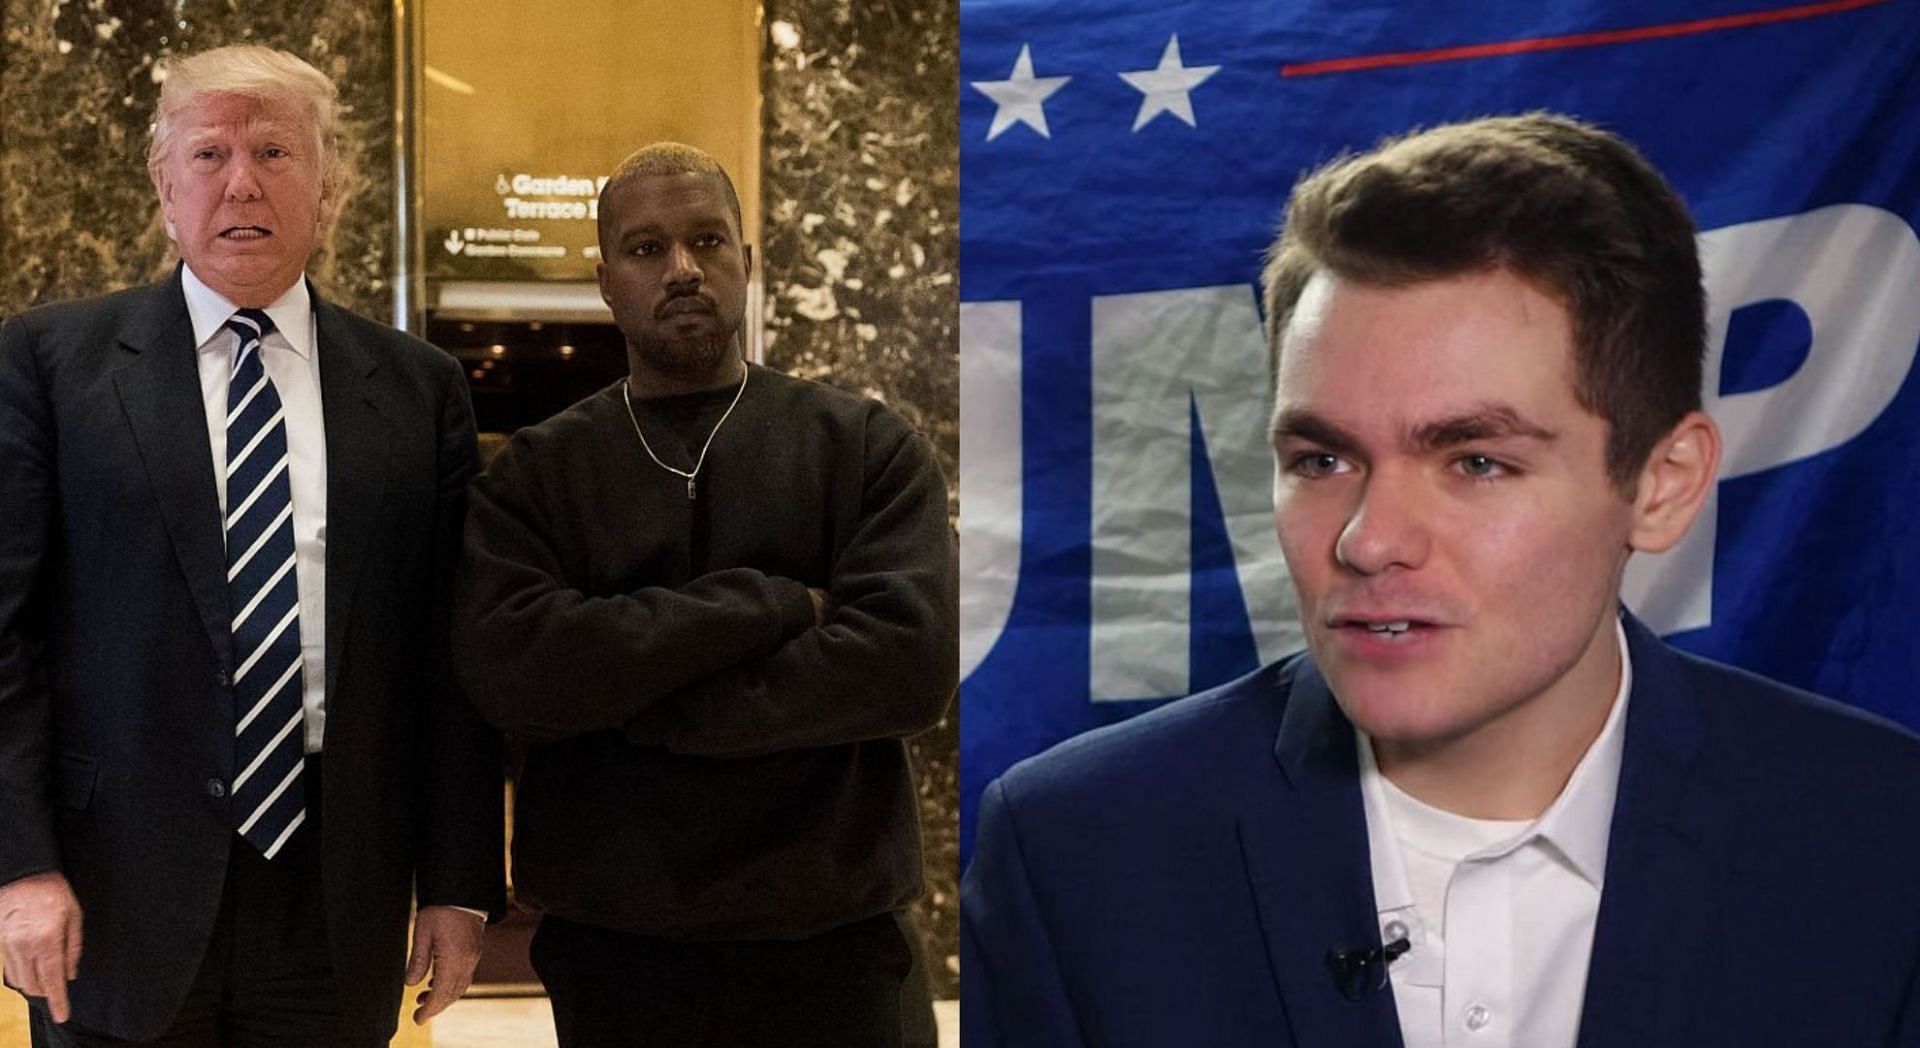 Nick Fuentes recently had dinner with Donald Trump and Kanye West at Mar-a-Lago (Image via Getty Images)